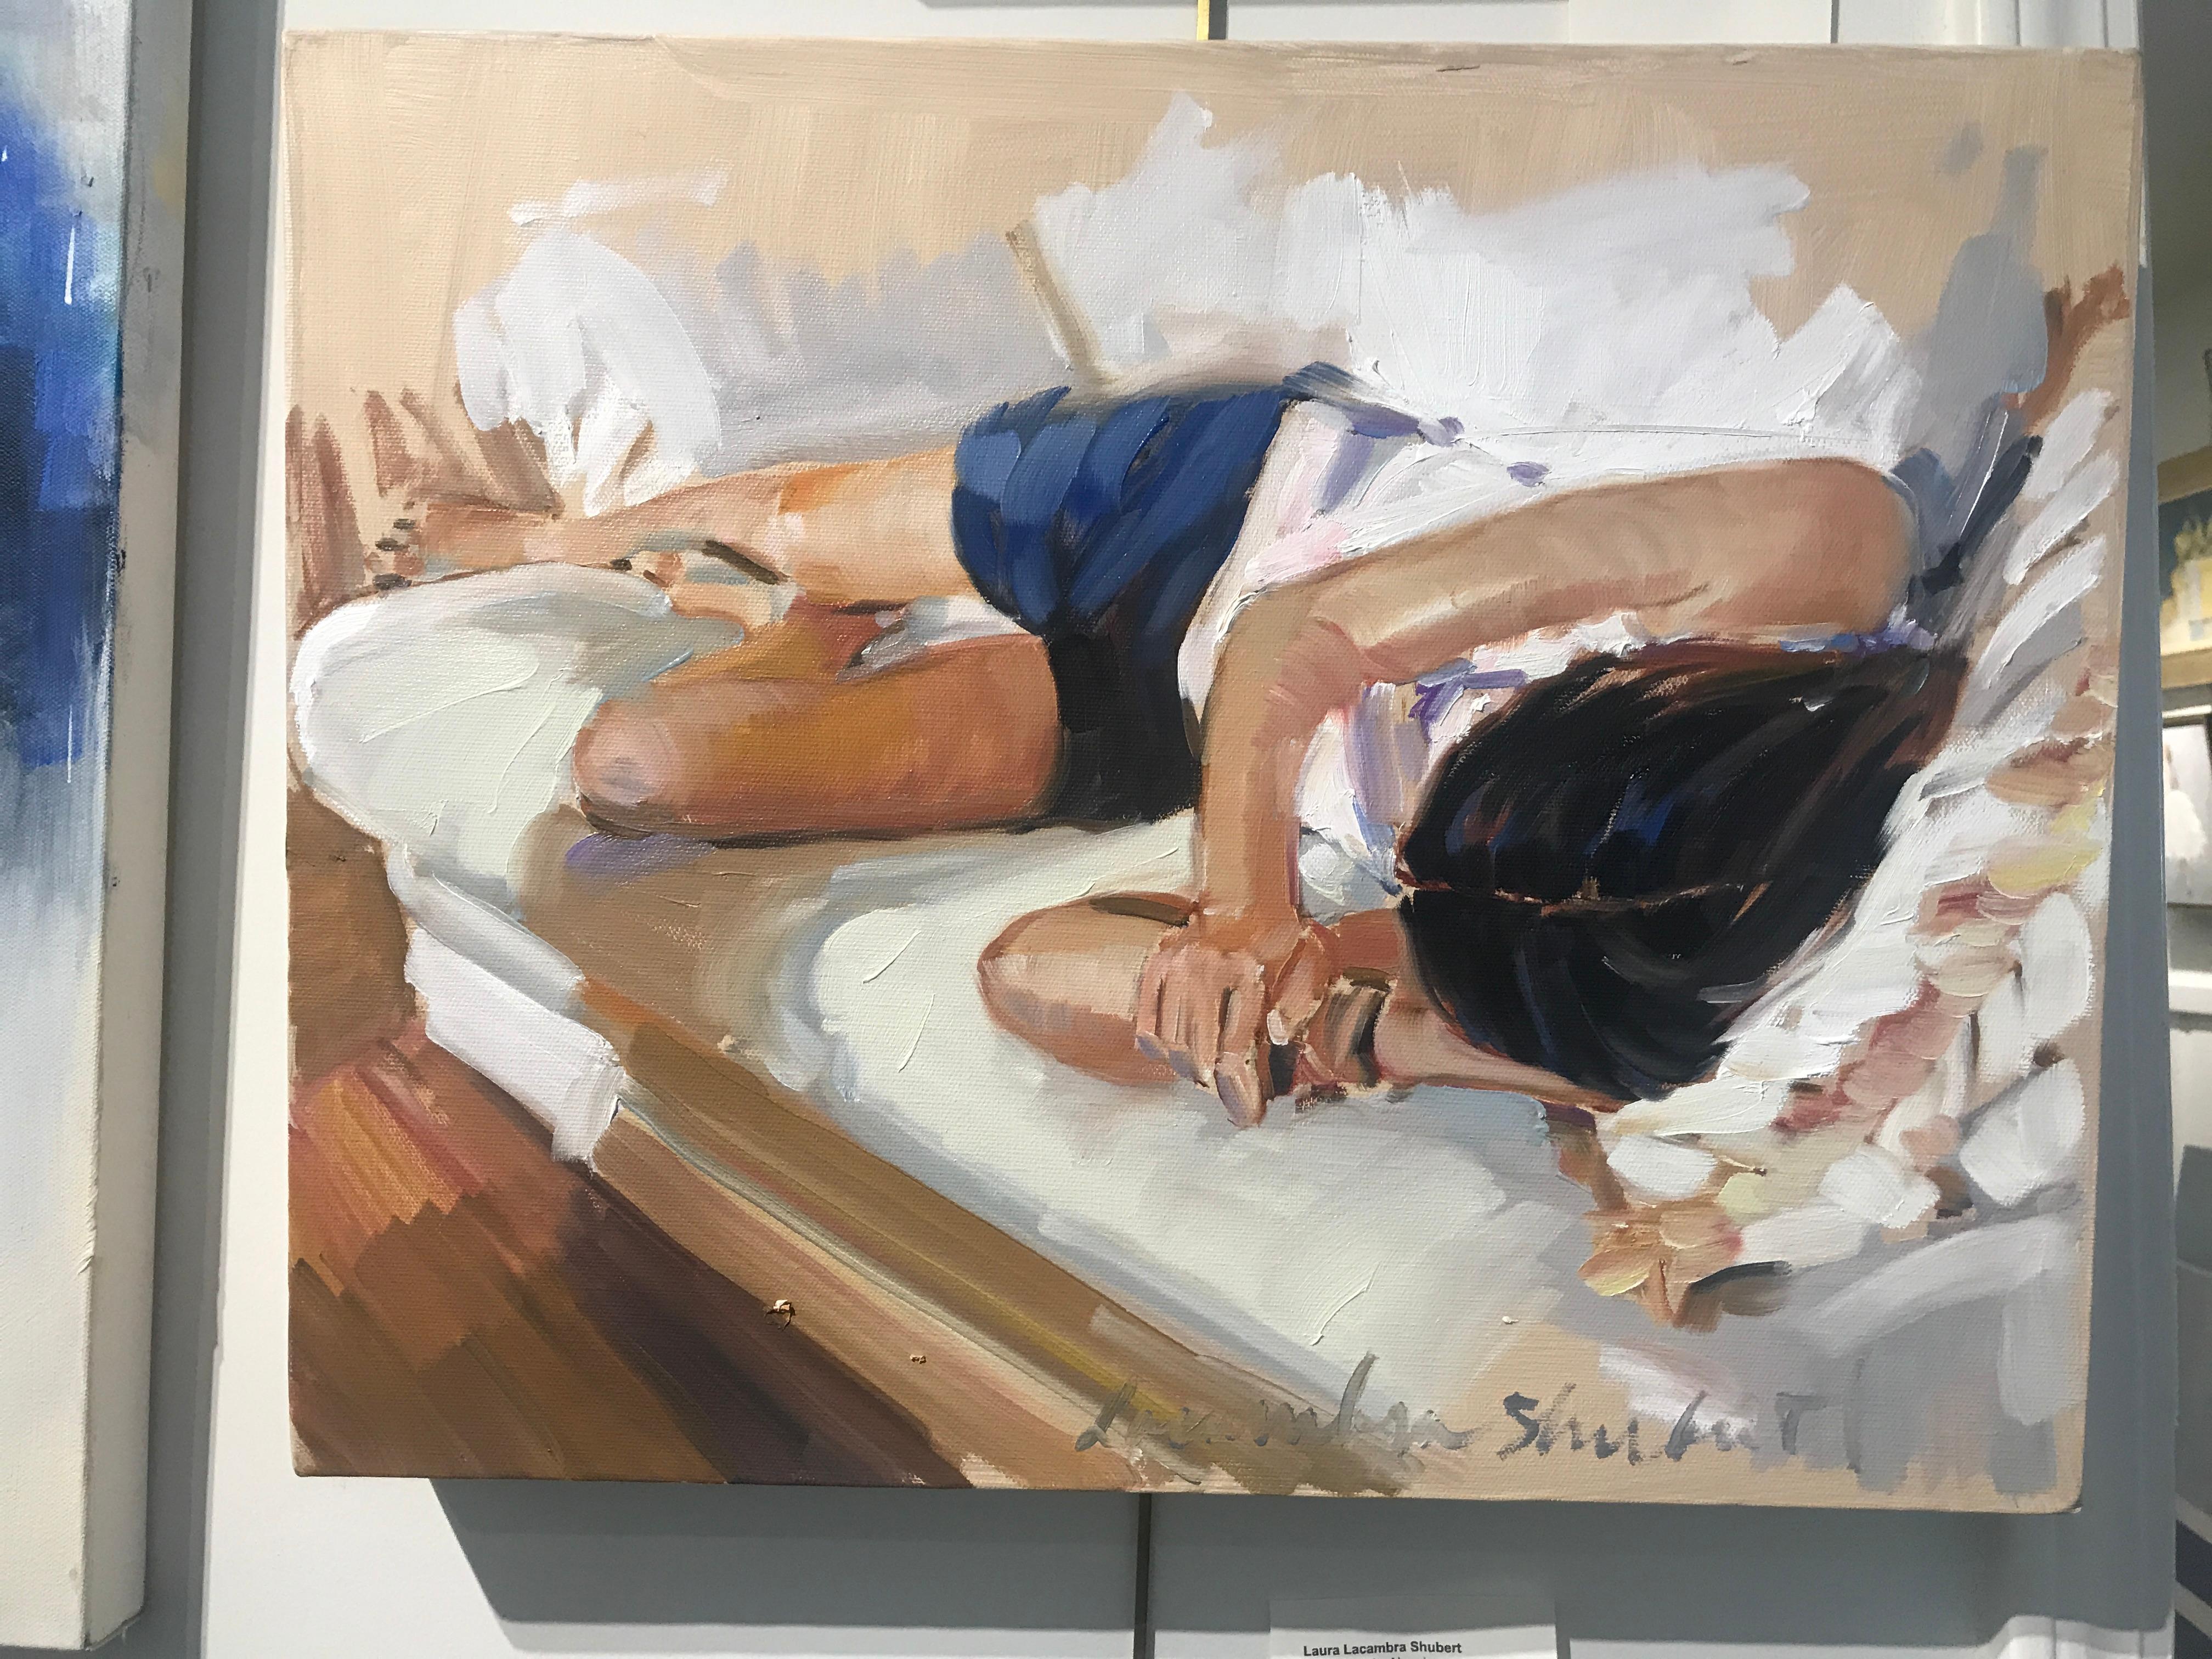 Alexandra Napping by Laura L. Shubert petite rectangle impressionist figure - Beige Figurative Painting by Laura Lacambra Shubert